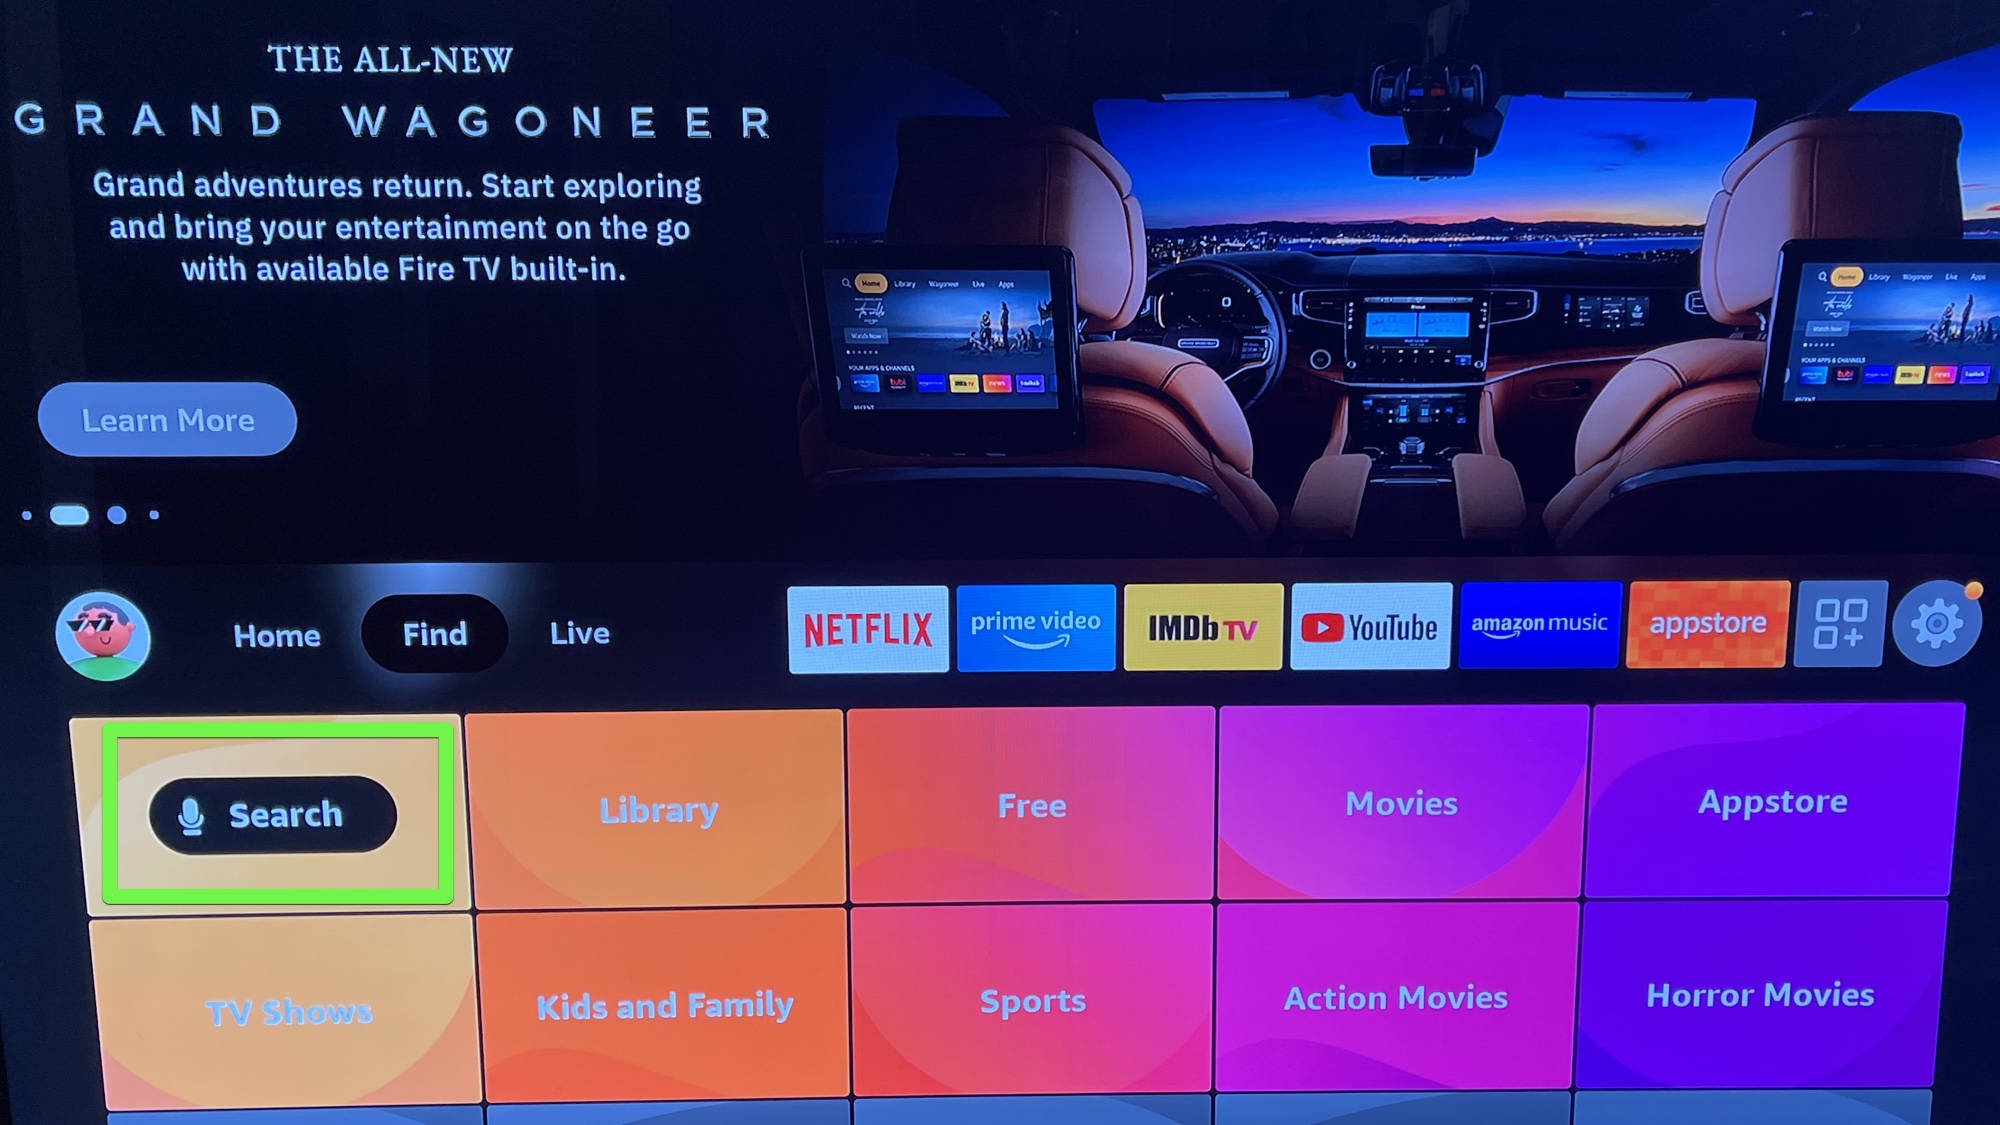 Fire TV home screen with Search highlighted